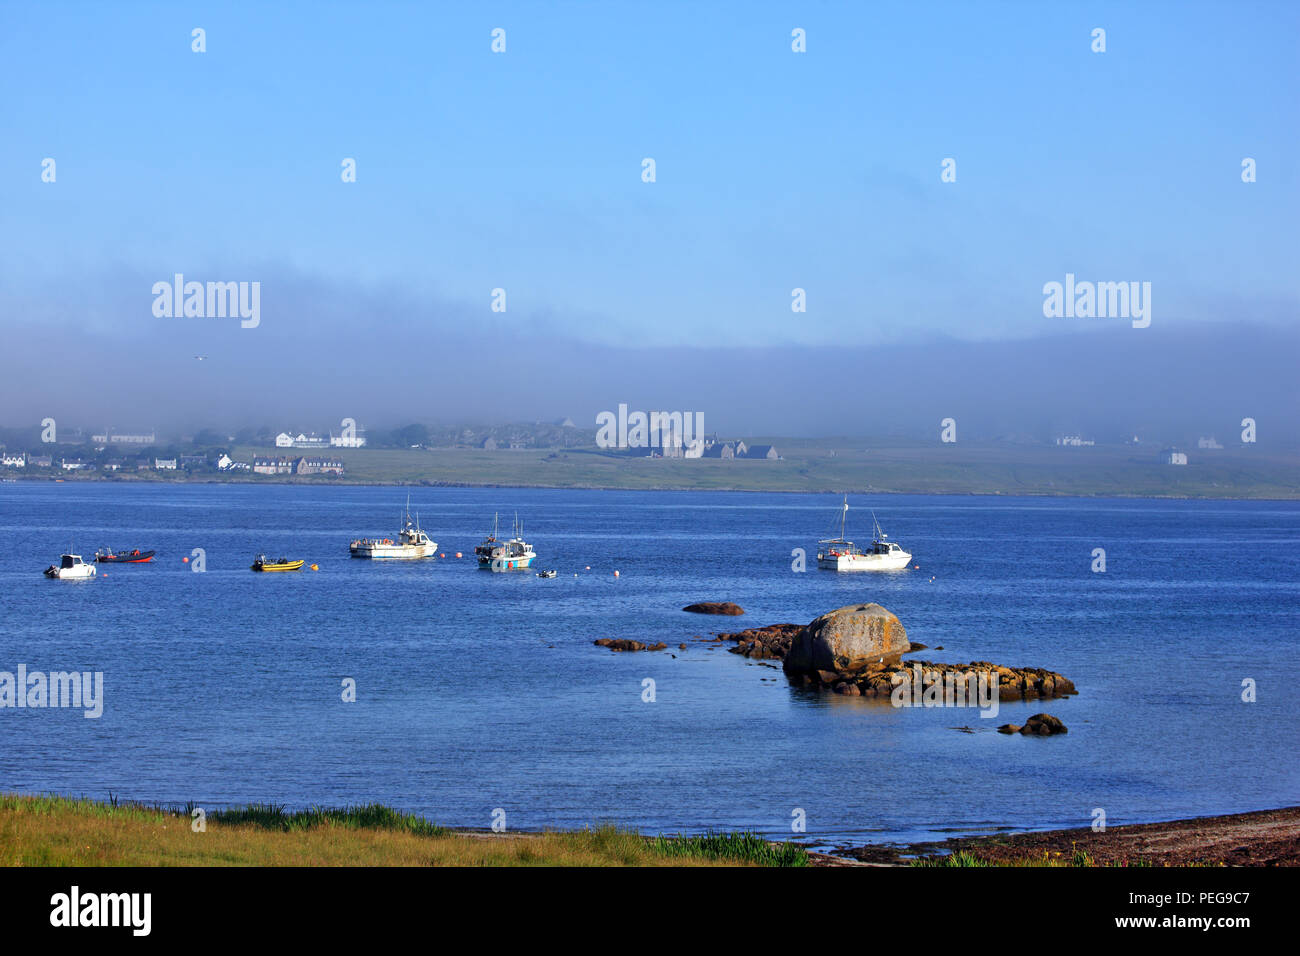 Sea mist coming in from the Atlantic Ocean over the Isle of Iona with boats, in the foreground, moored off Fionnphort on the Isle of Mull Stock Photo